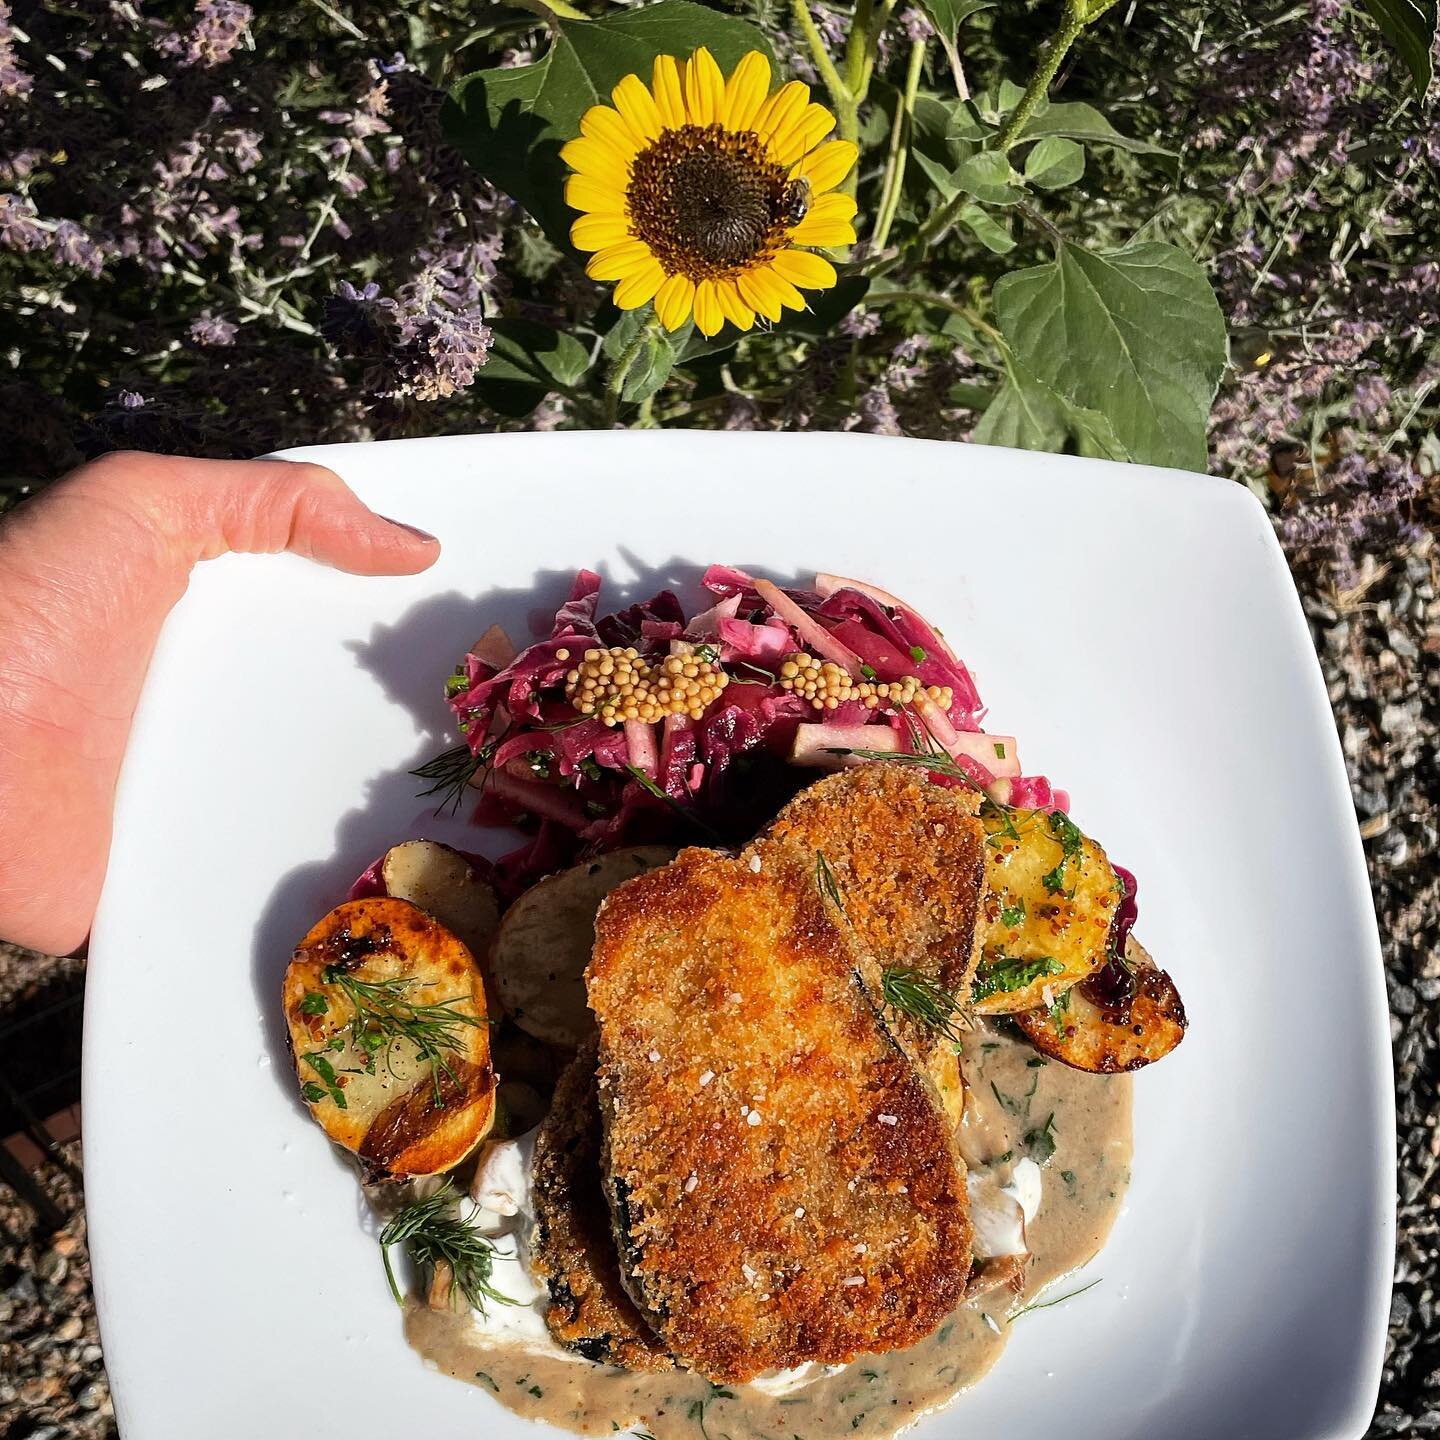 We hope that you like our new vegetarian entr&eacute;e as much as this little bee likes this sunflower. Come enjoy an eggplant schnitzel with oyster mushroom gravy, honey mustard taters, and red cabbage and apple slaw!

#cityparkdenver #diningoutdenv